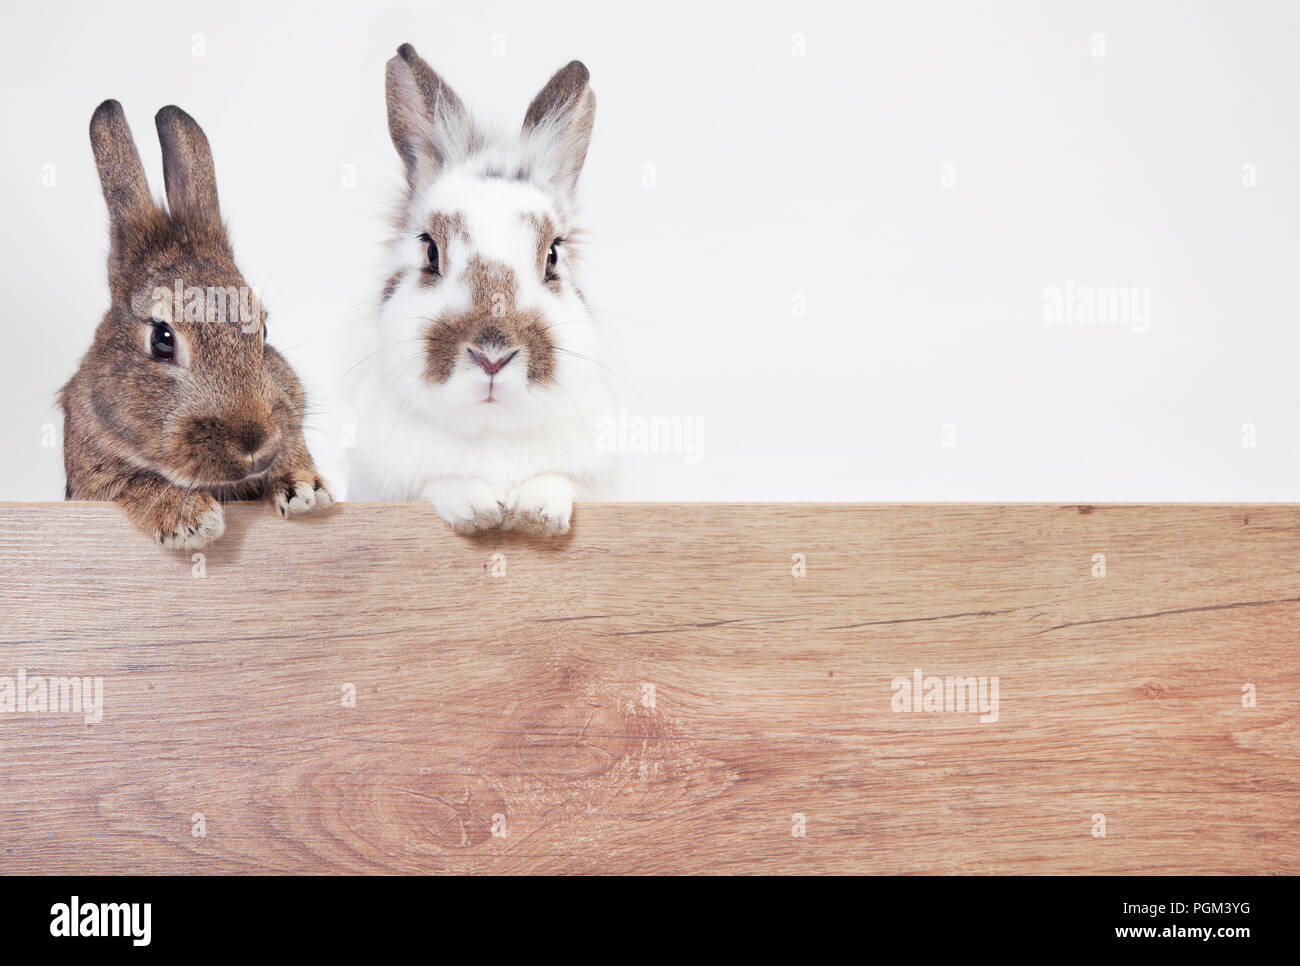 two rabbits on a wooden billboard, isolated with white background Stock Photo